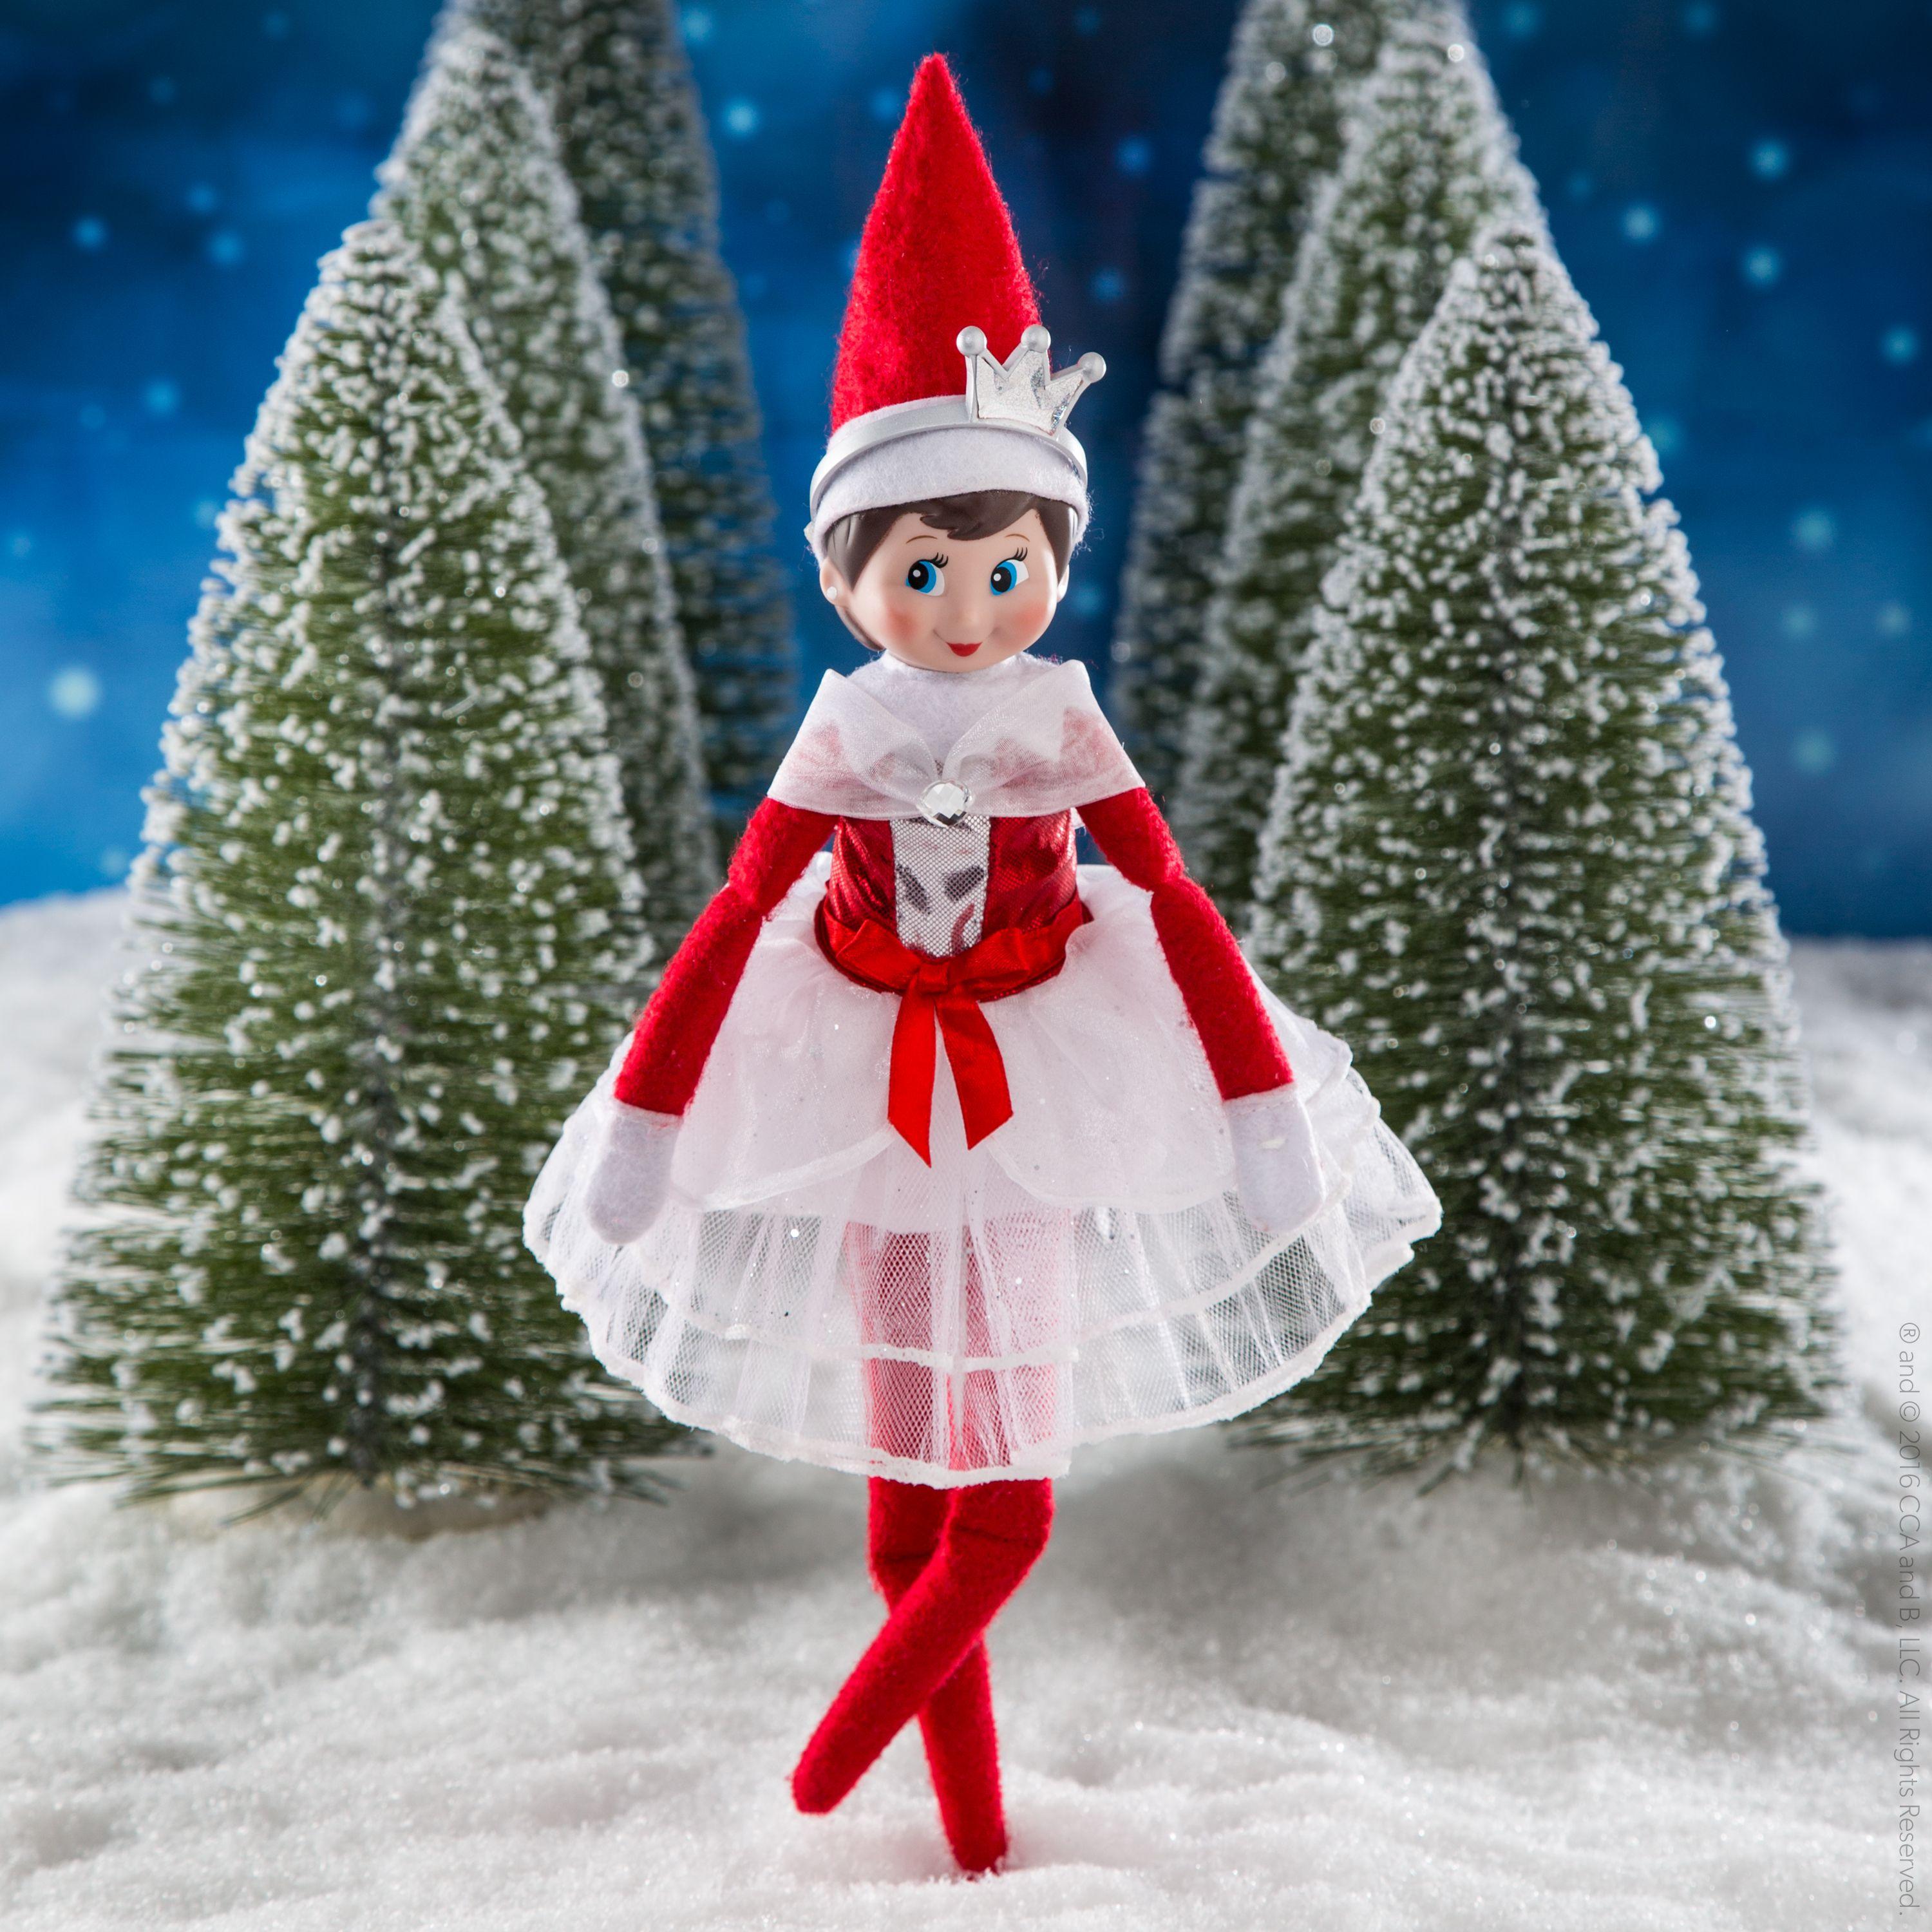 Elf On the Shelf Wallpapers - Top Free Elf On the Shelf ...